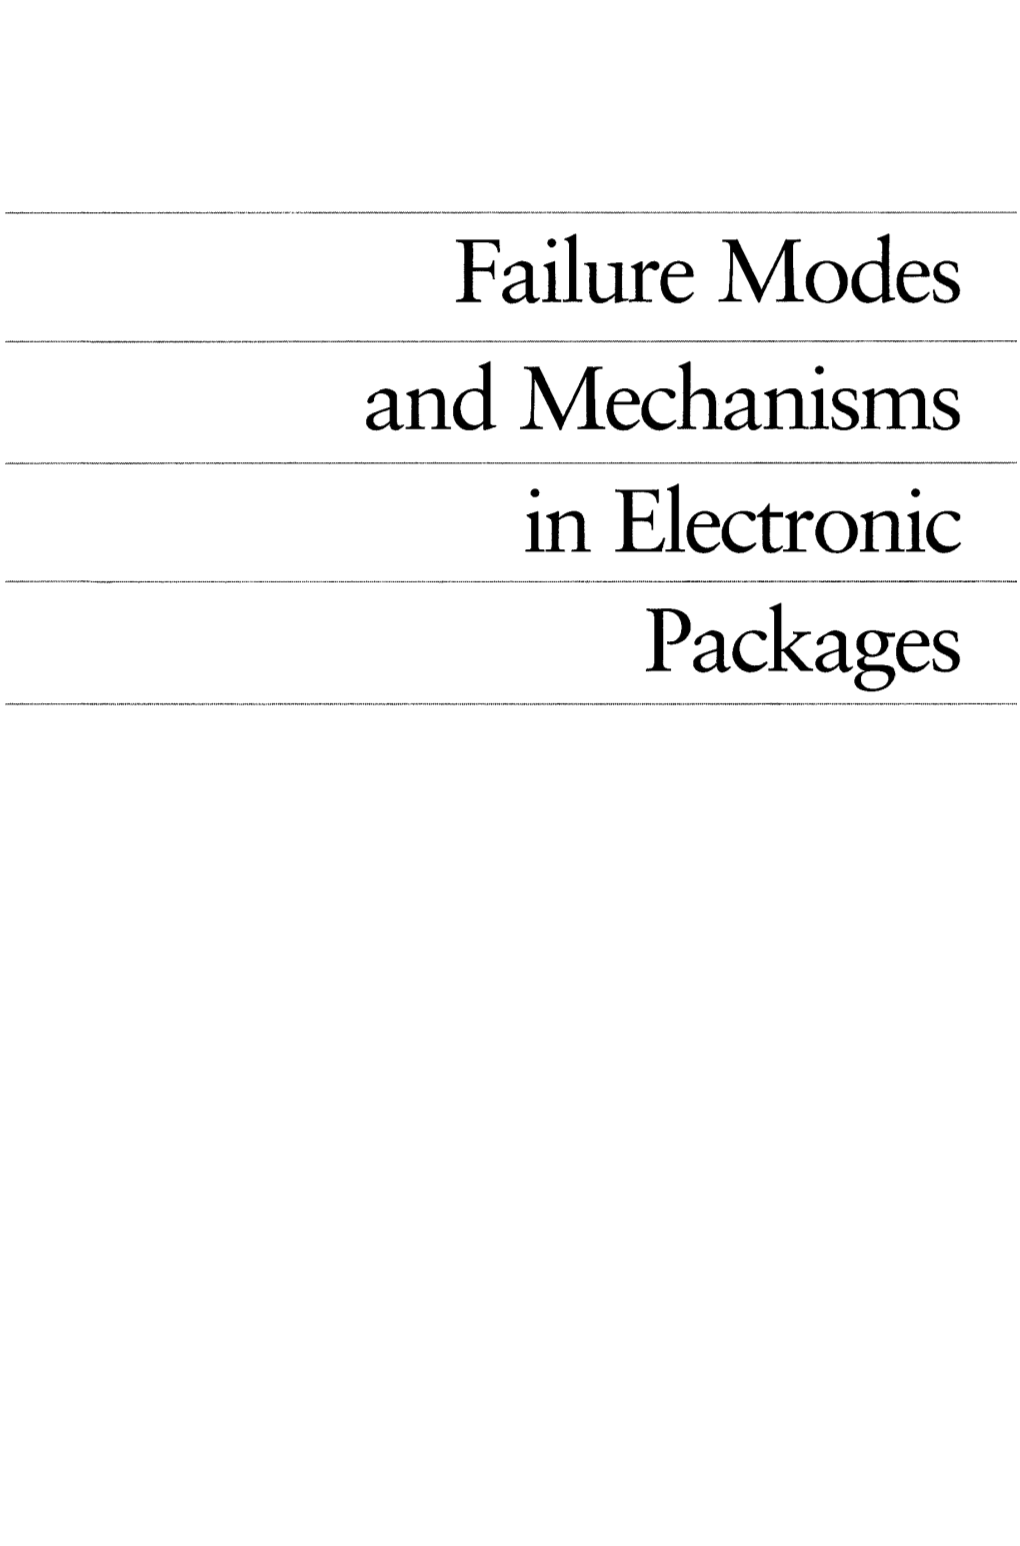 Failure Modes and Mechanisms in Electronic Packages Failure Modes and Mechanisms in Electronic Packages